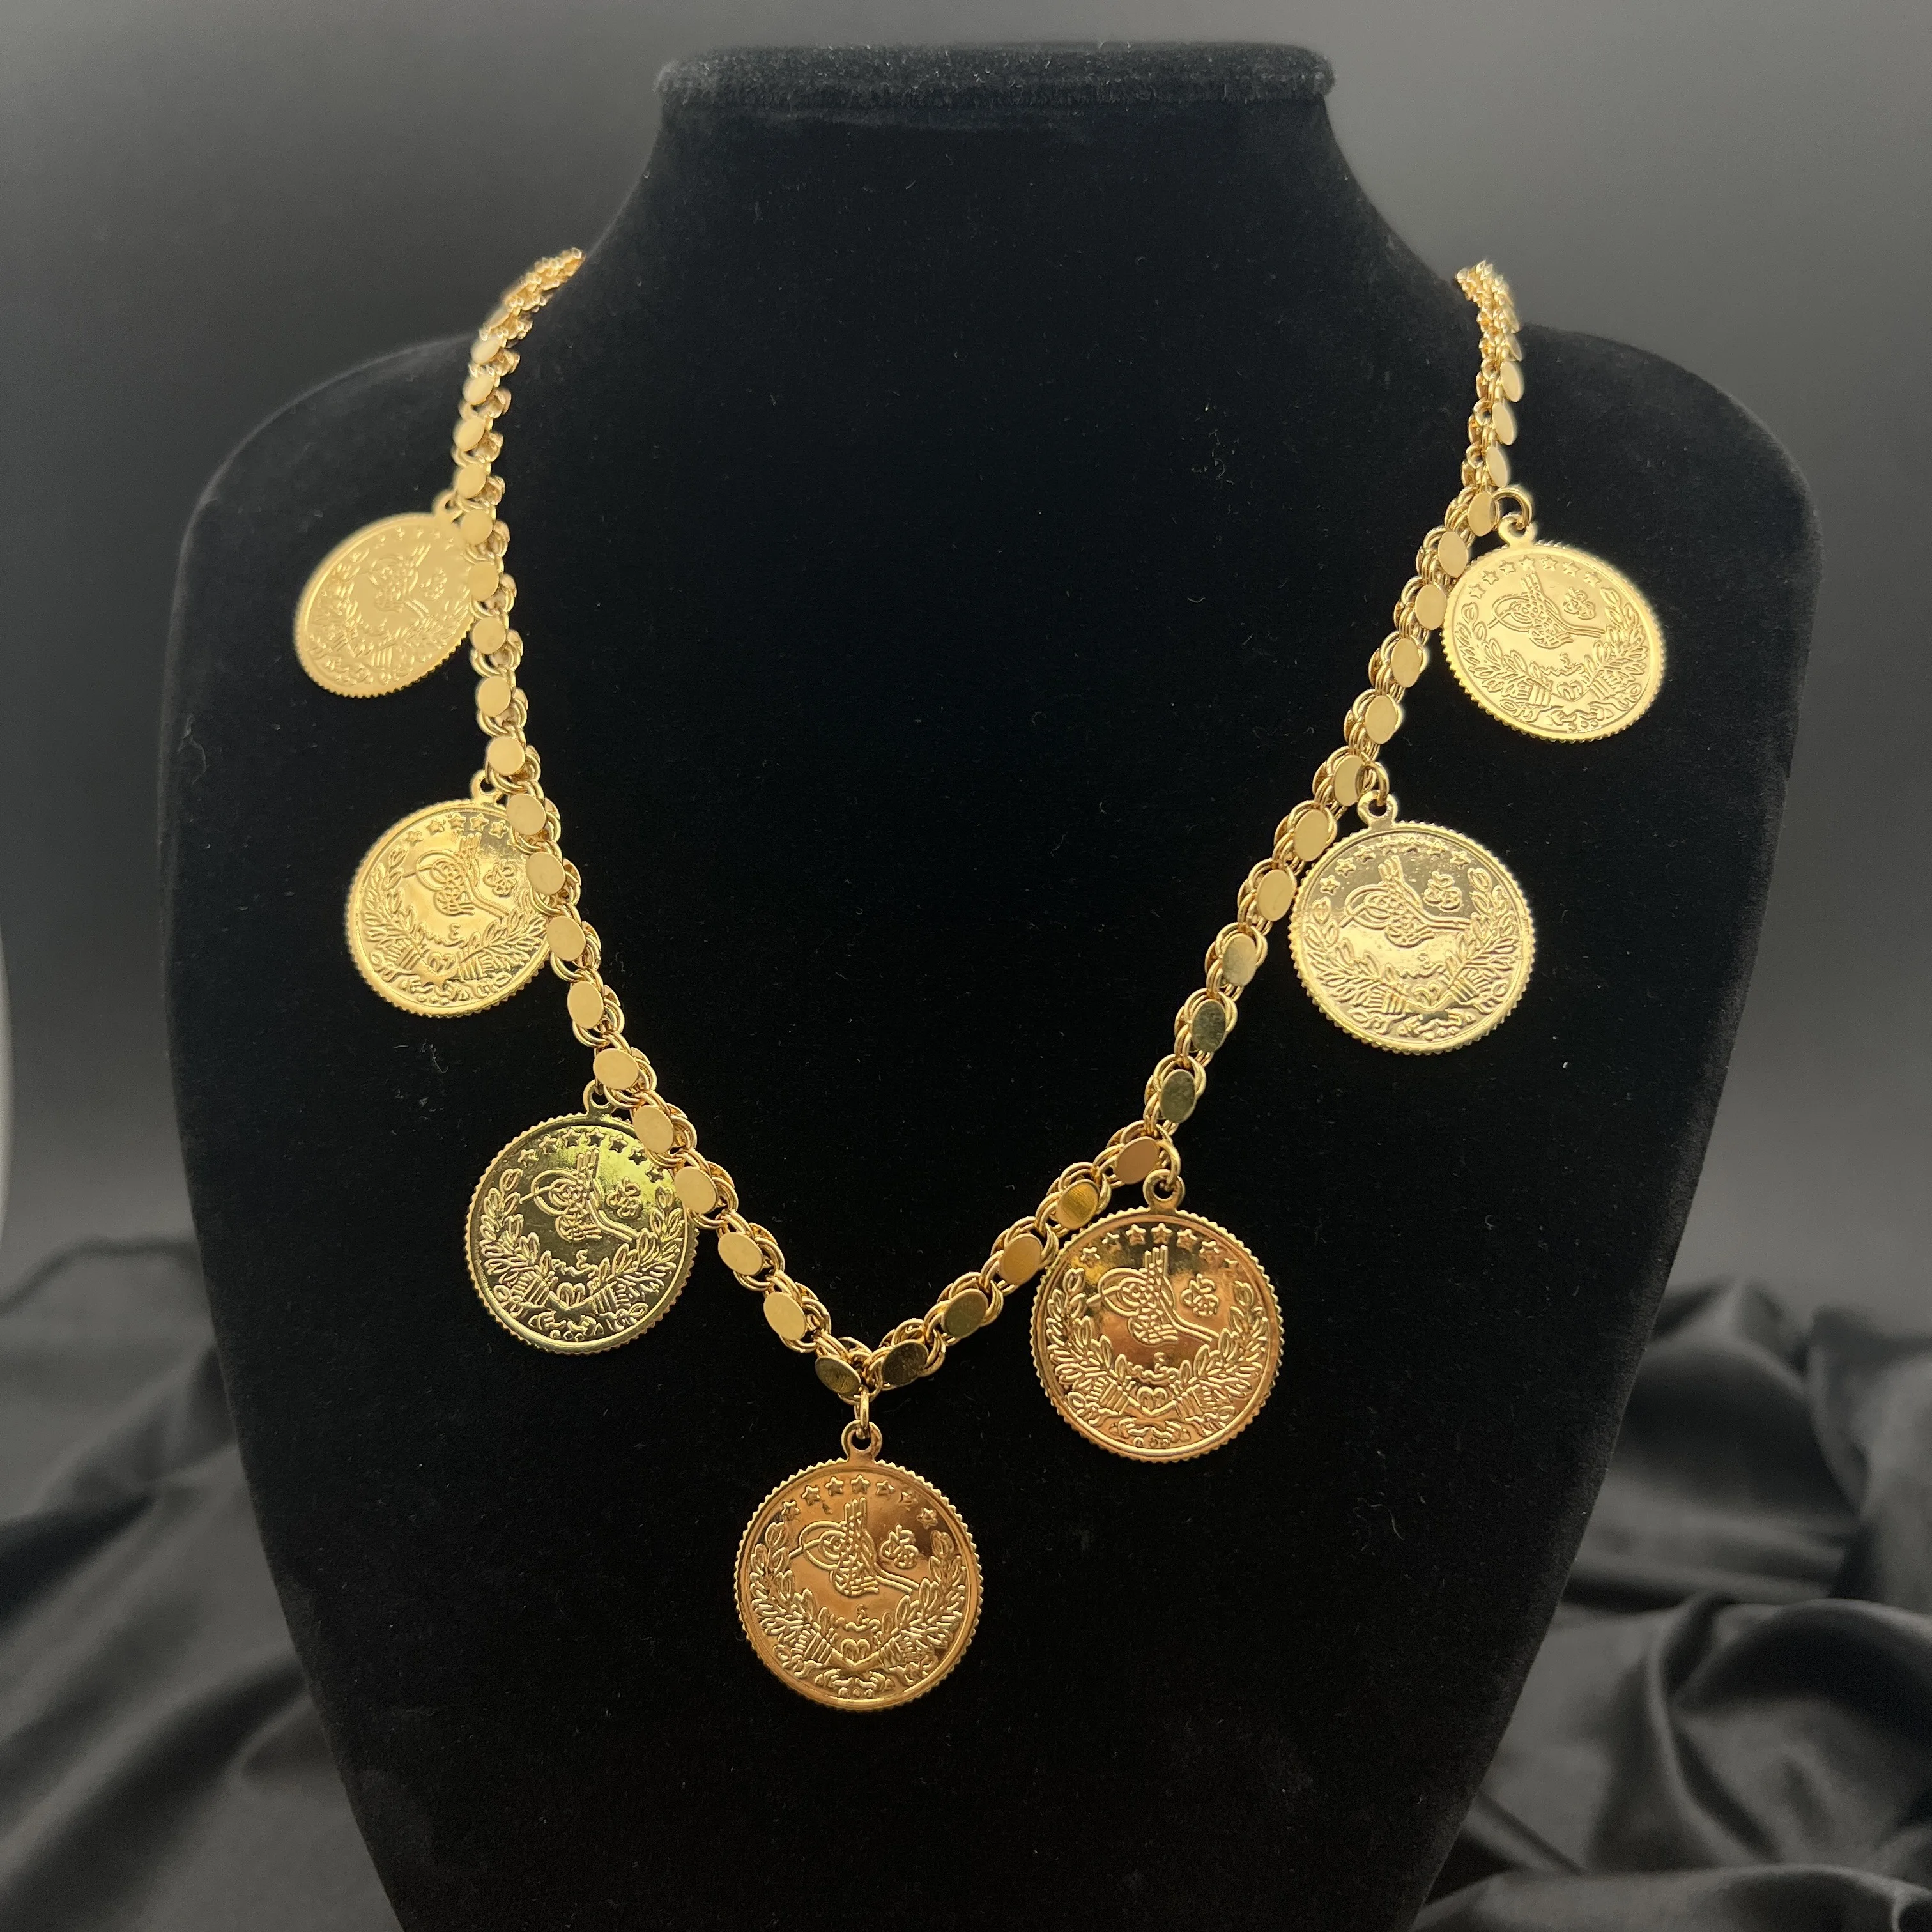 

MANDI New Three Size Coins Pendant Necklaces for Women Factory Price Turkish Arab Popular Gold Plated 60cm Handmade Chains